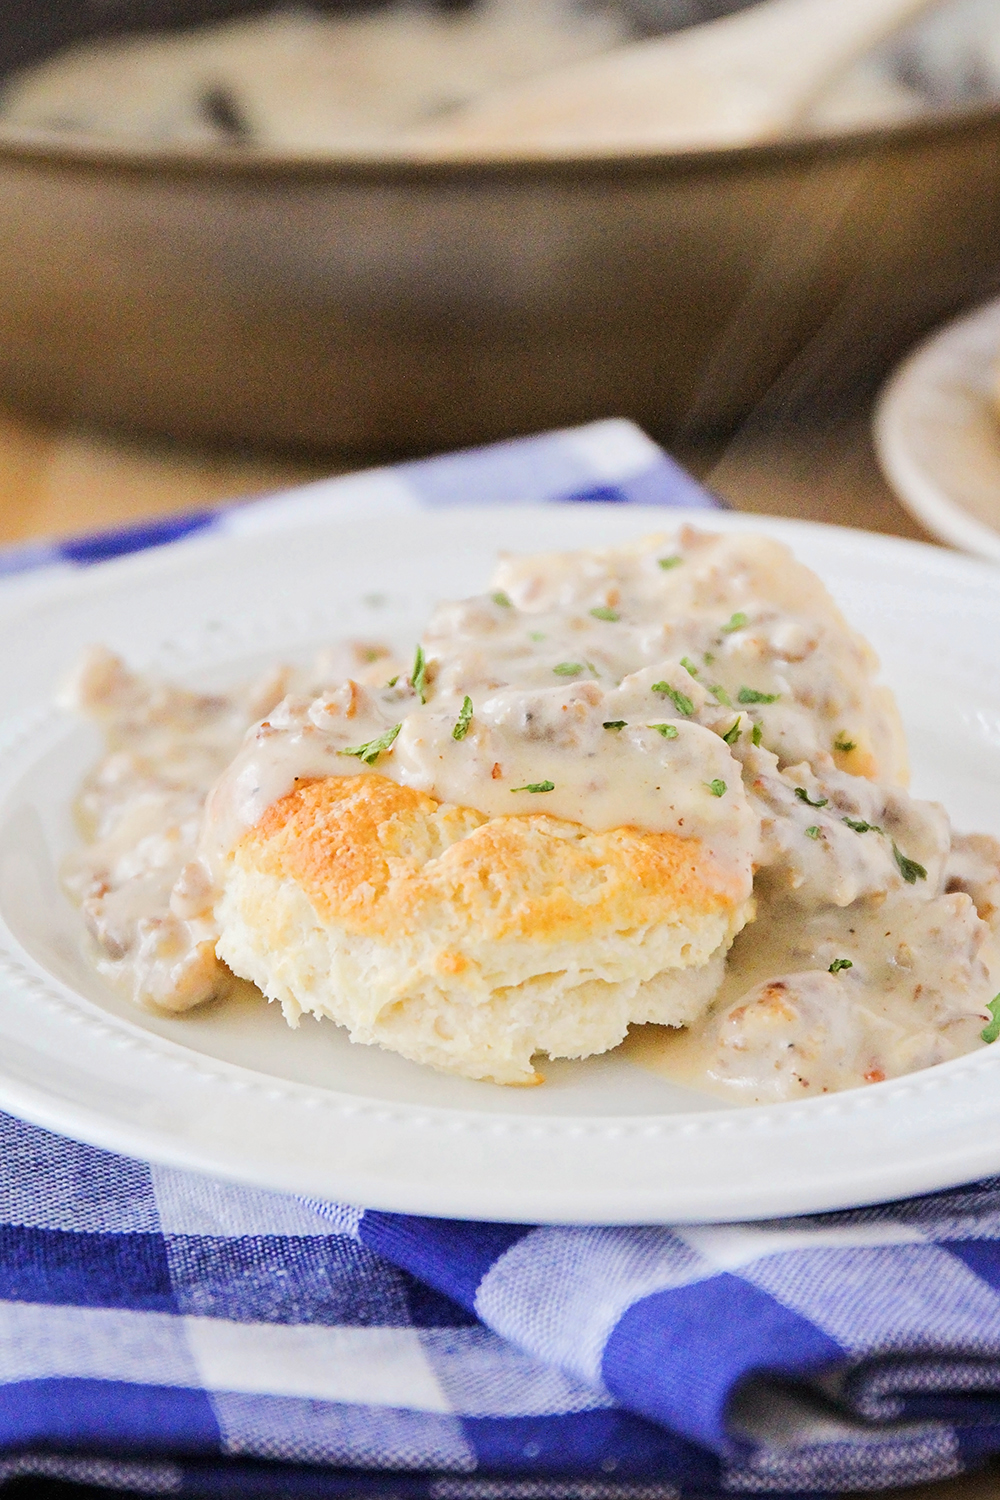 This delicious biscuits and gravy recipe is so easy to make, and so filling. It's a hearty breakfast that the whole family will love!